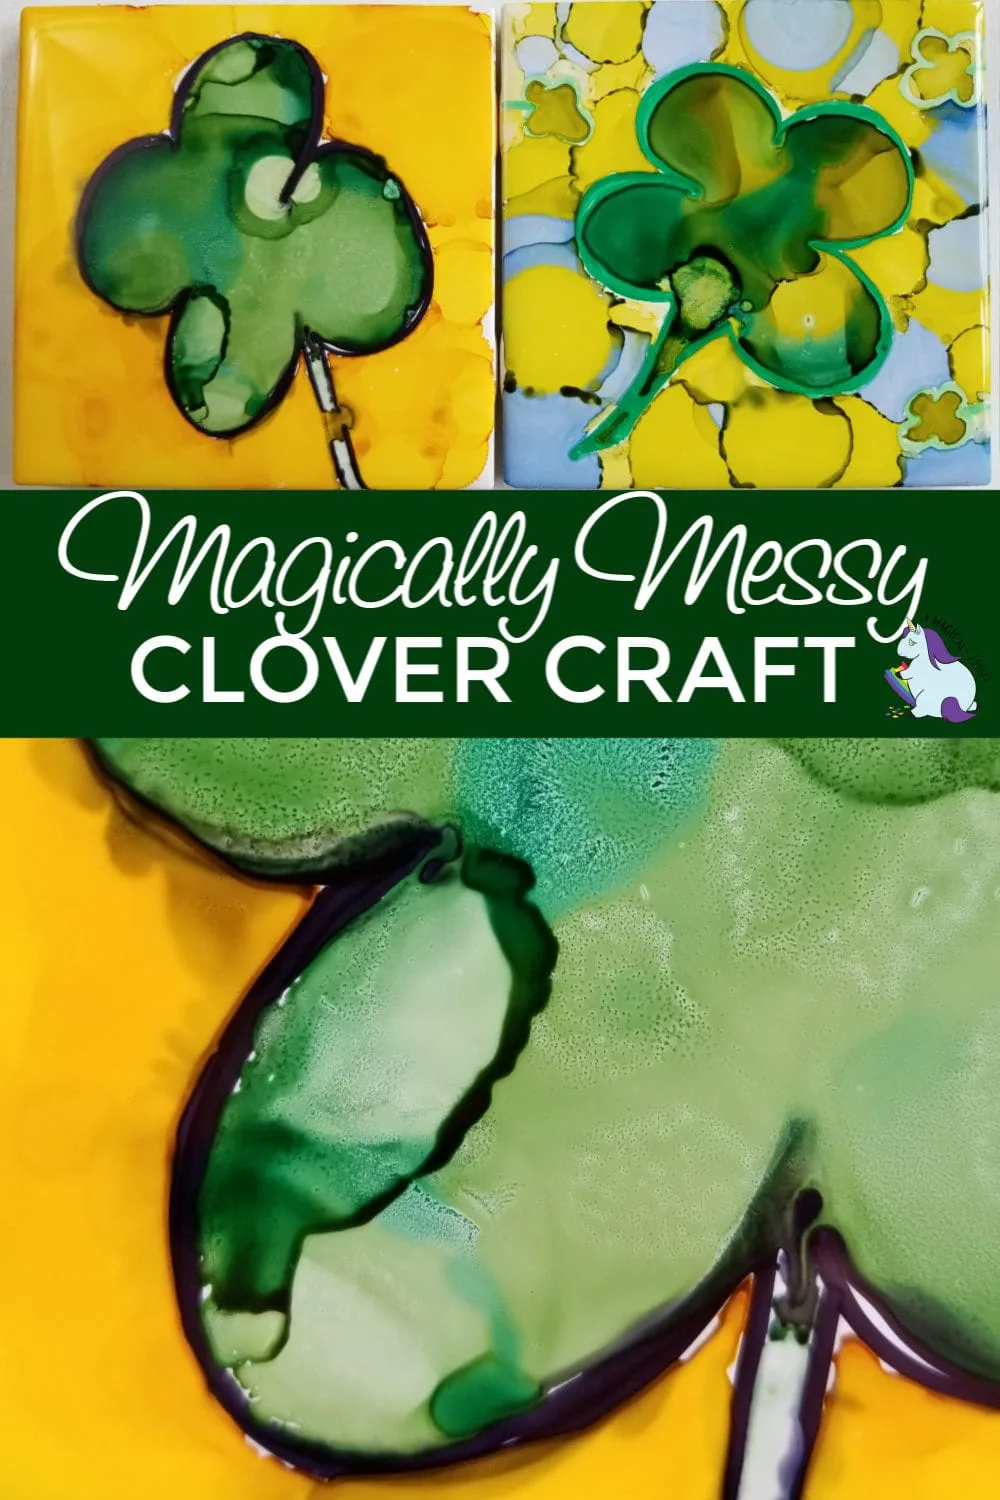 Magically messy clover craft